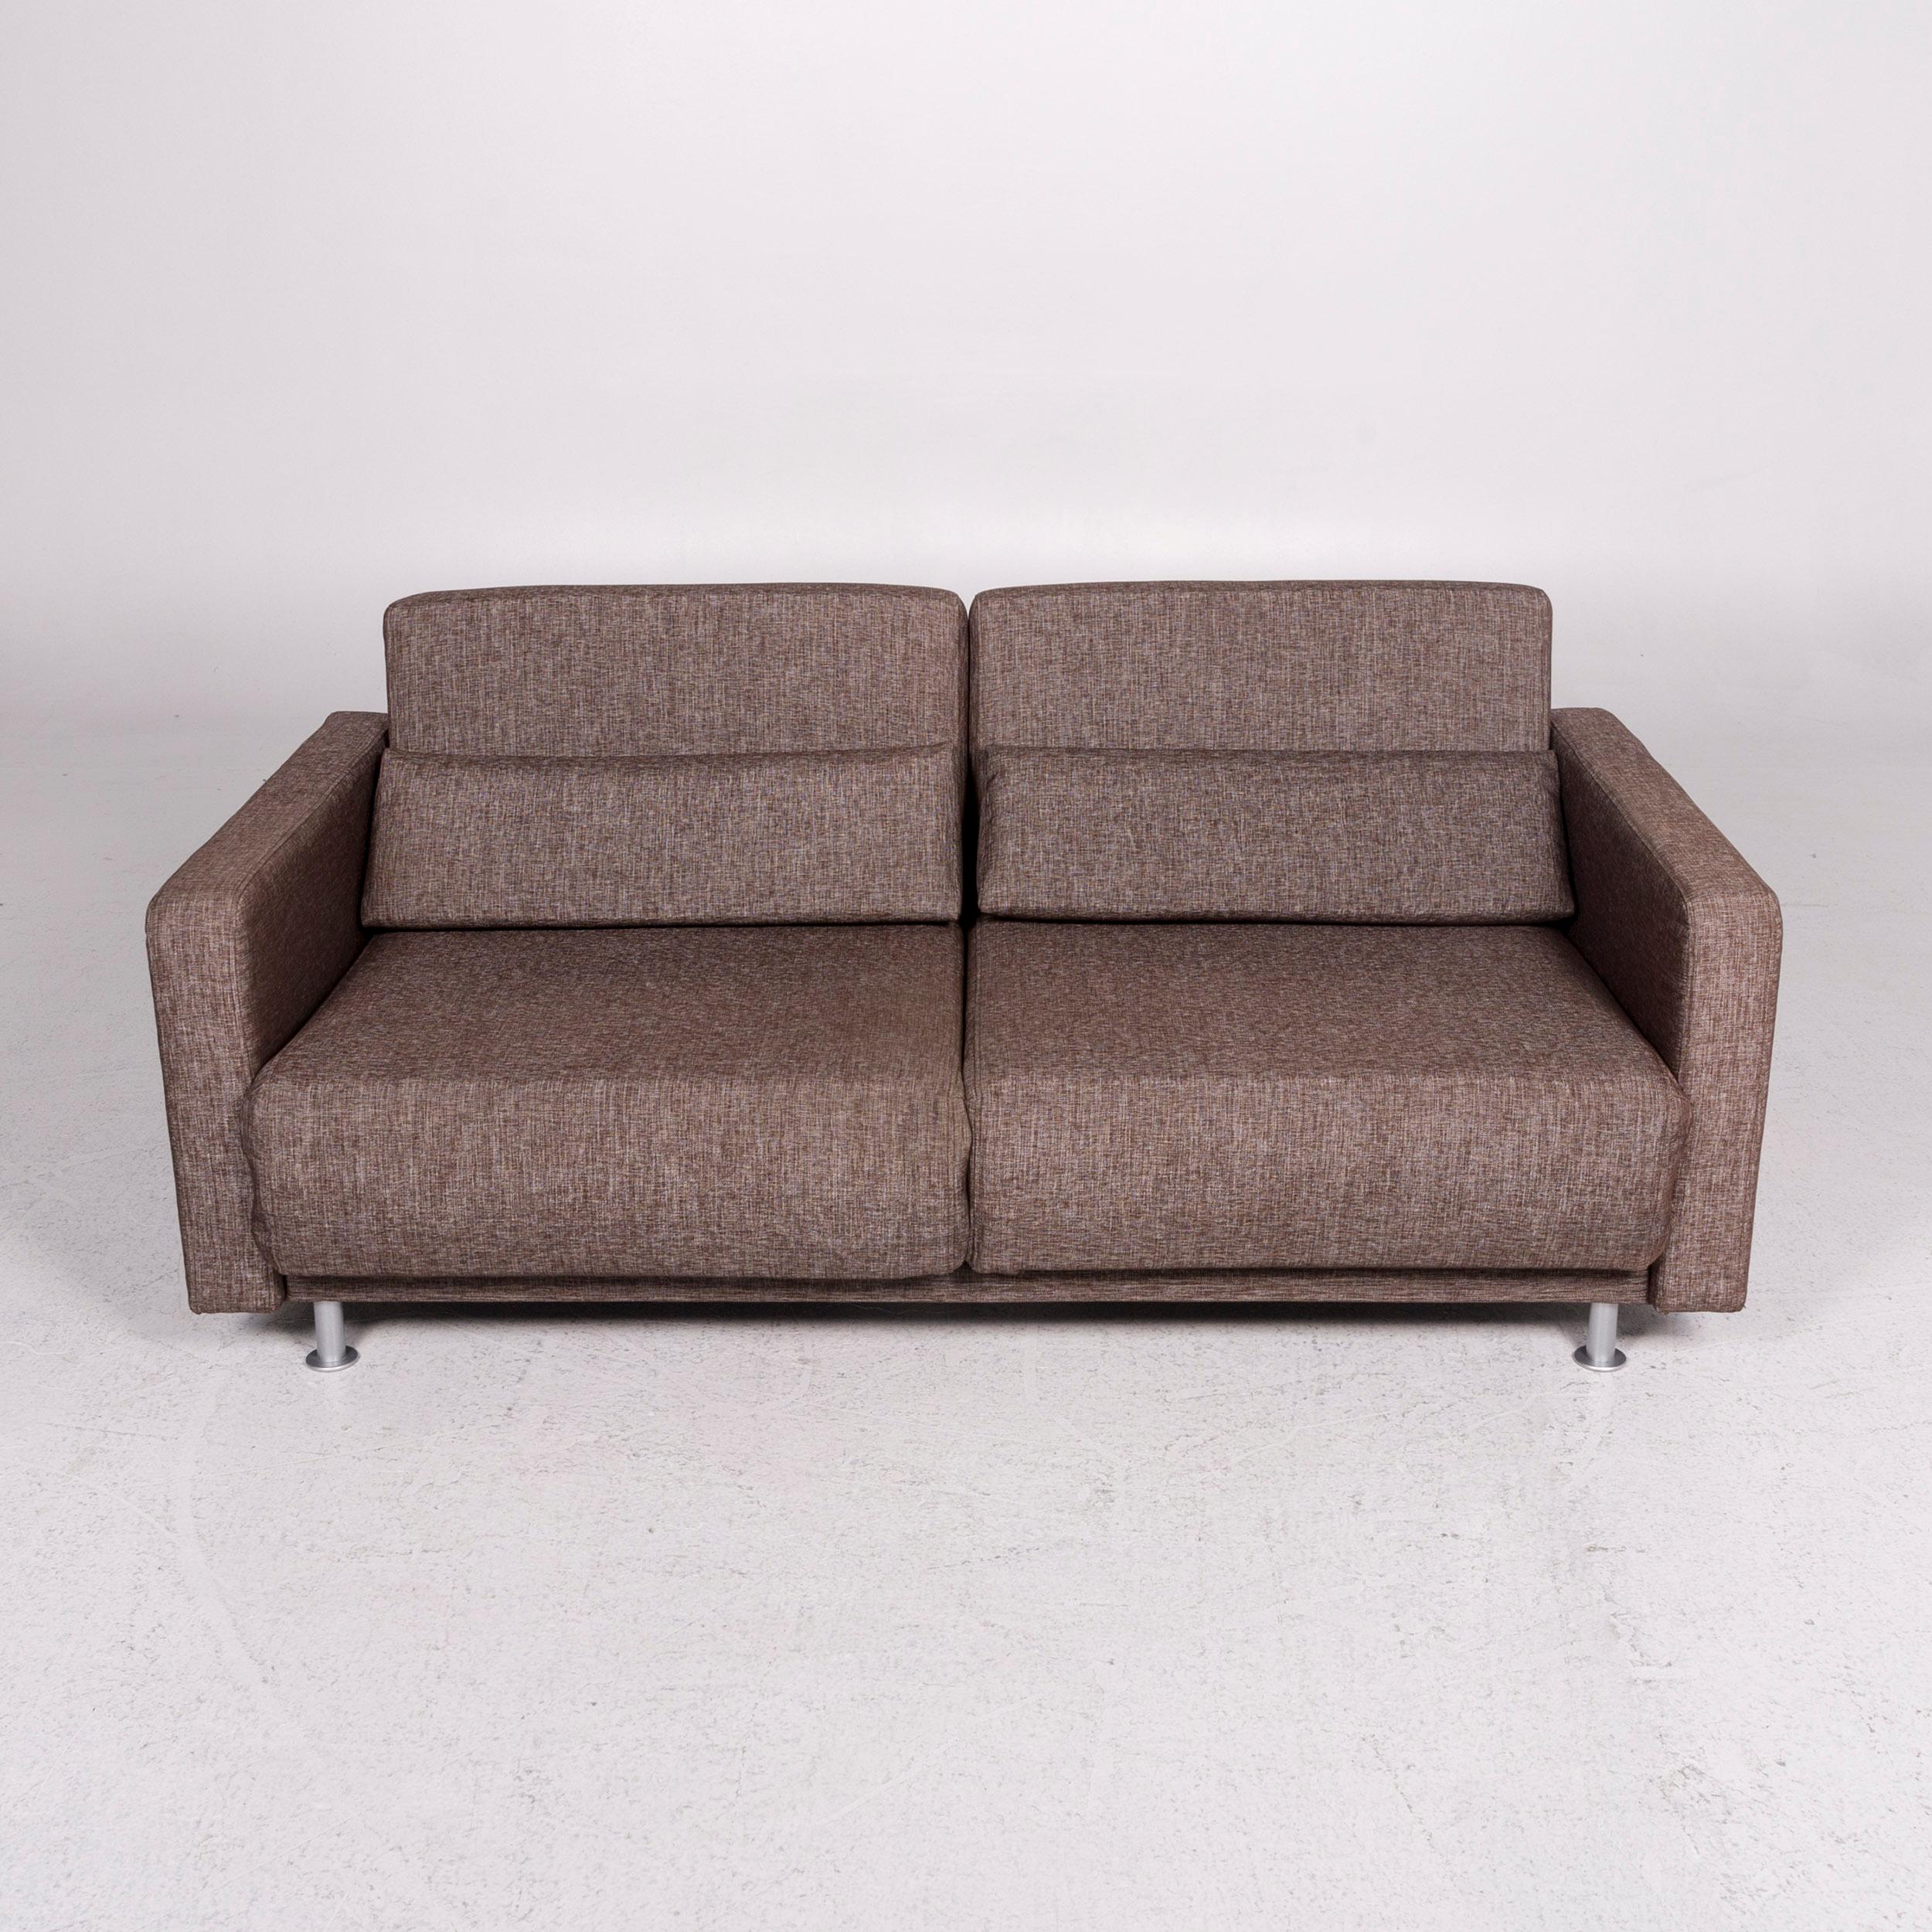 Lithuanian BoConcept Melo Fabric Sofa Bed Brown Sofa Sleep Function Function Couch